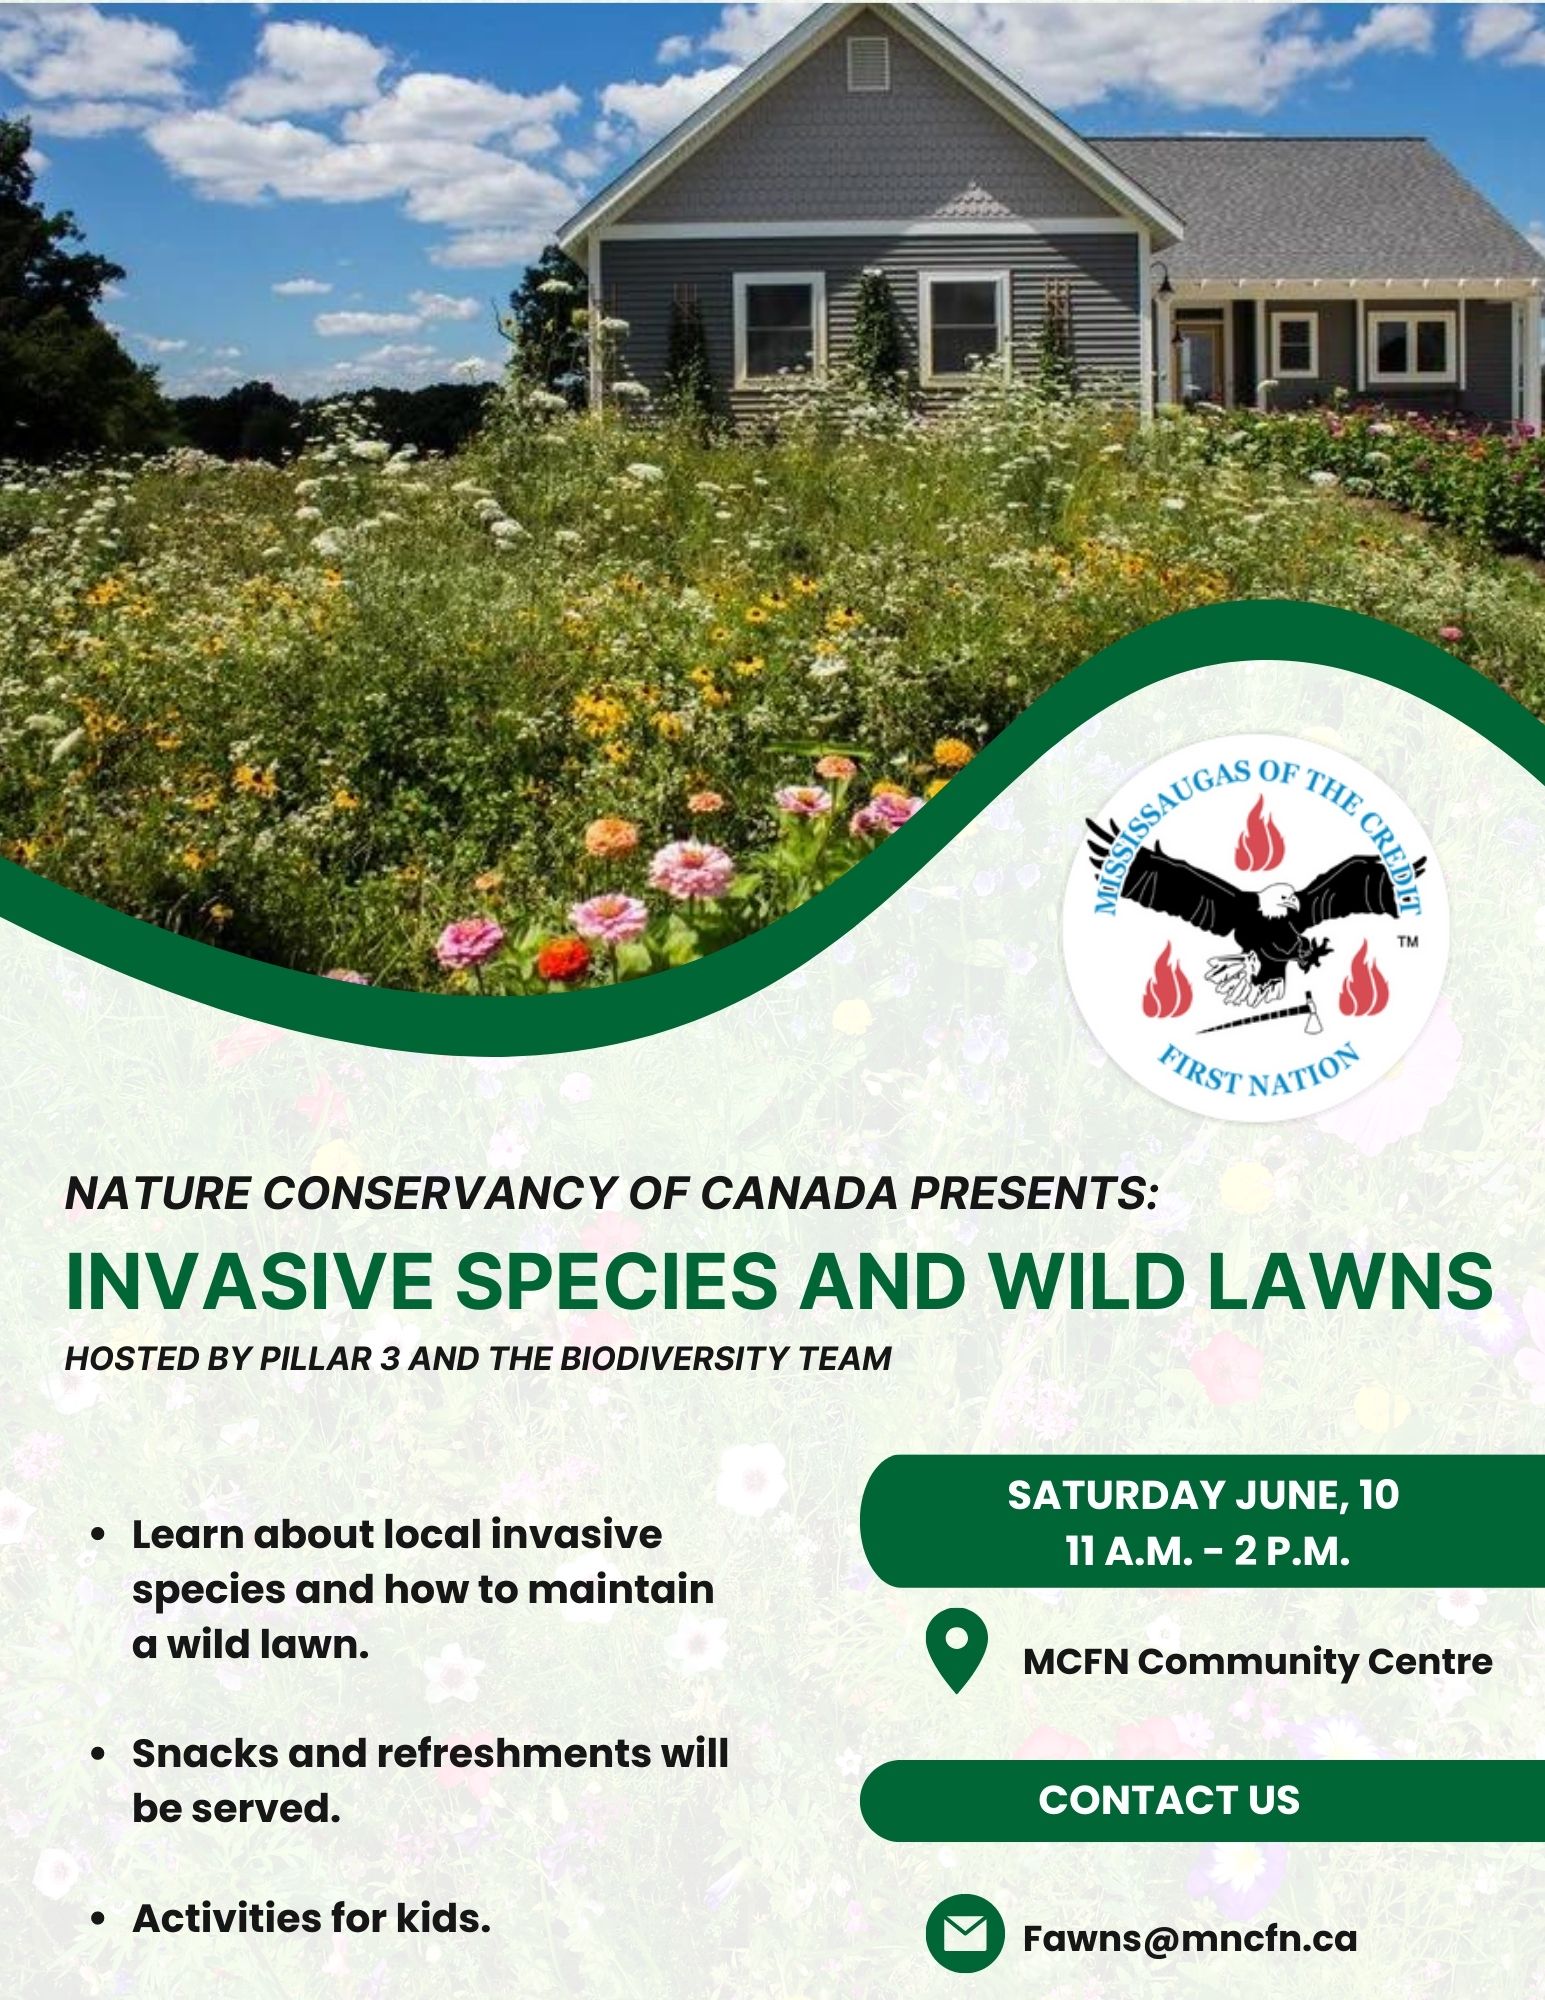 Learn more about invasive species and wild lawns